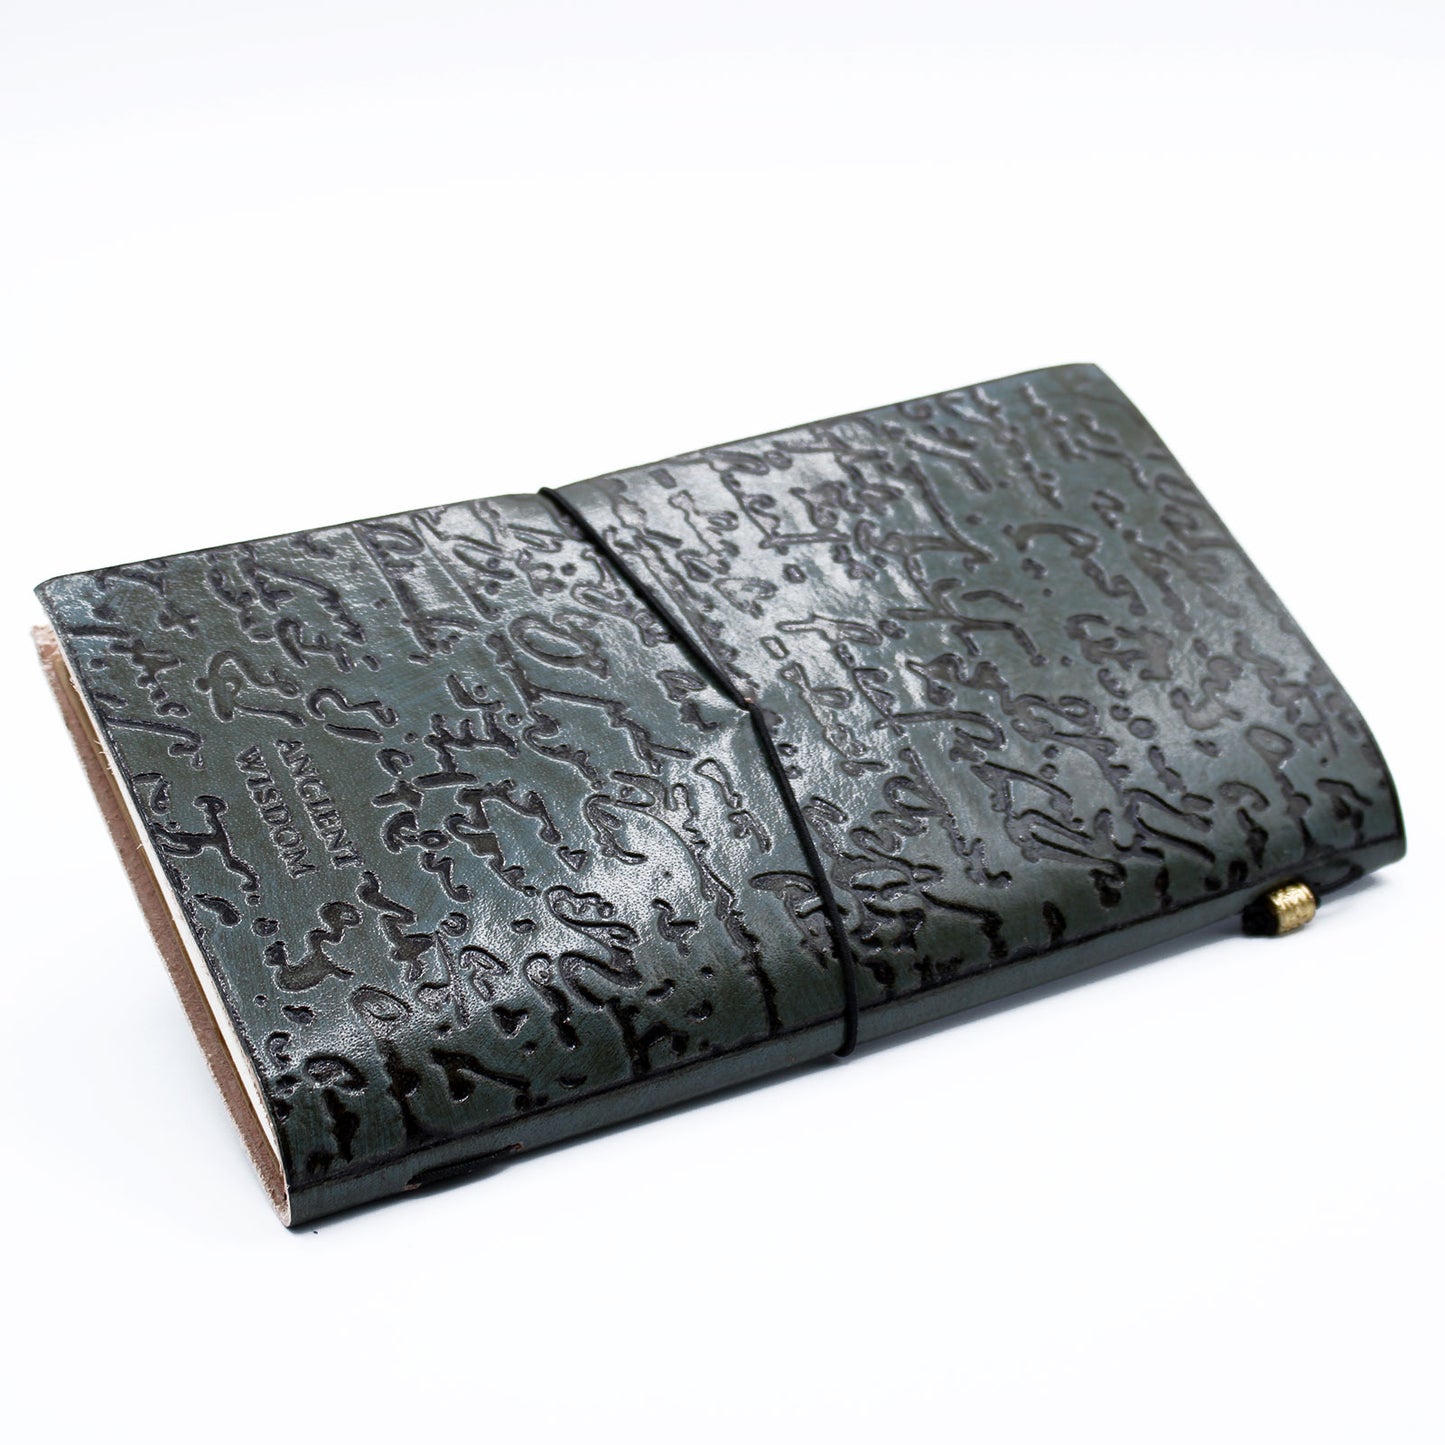 Handmade Leather Journal - Good Ideas and Other Dreams